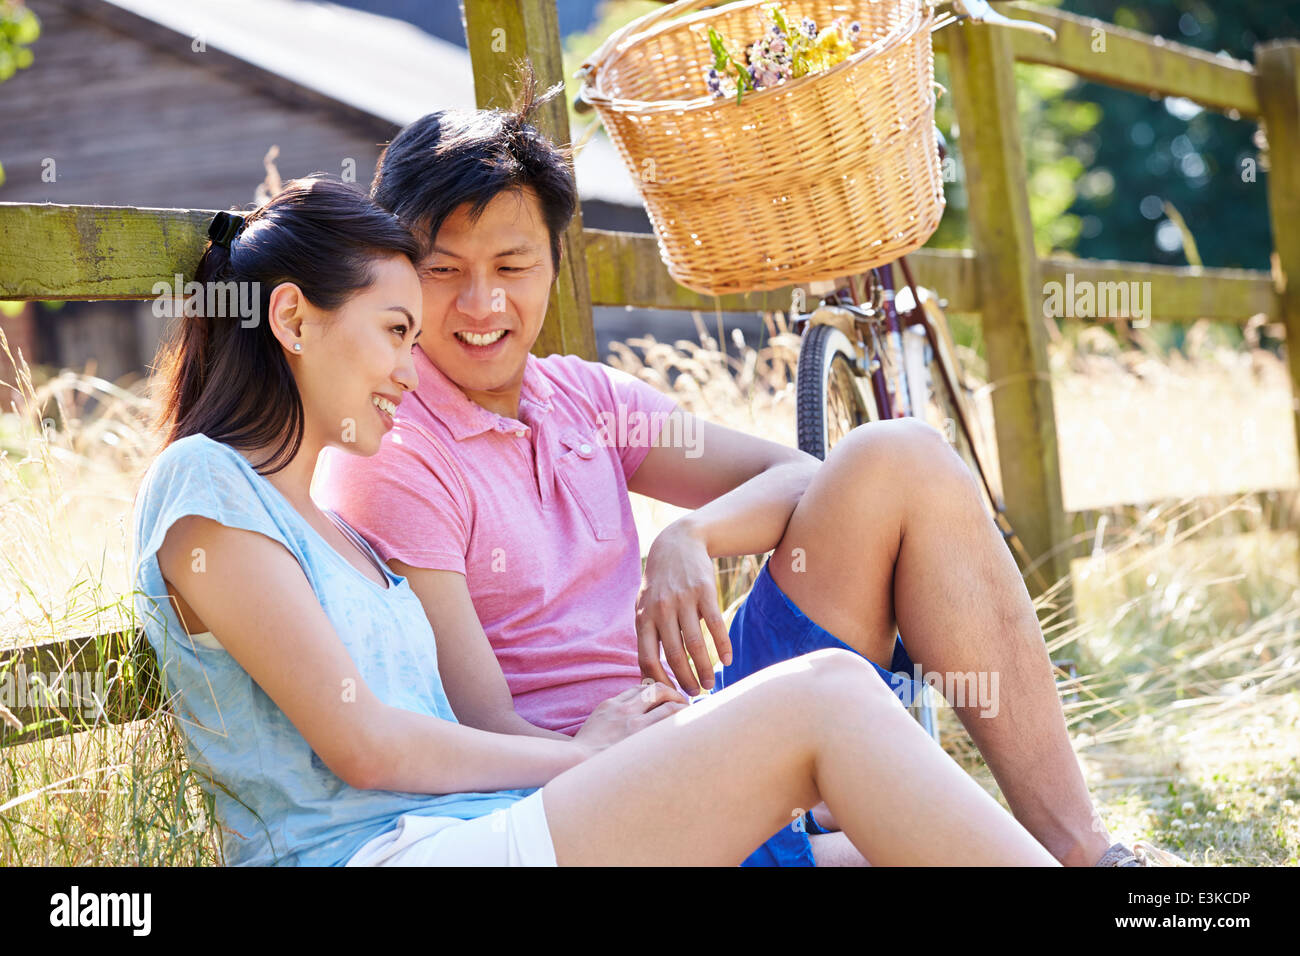 Asian Couple Resting By Fence With Old Fashioned Cycle Stock Photo